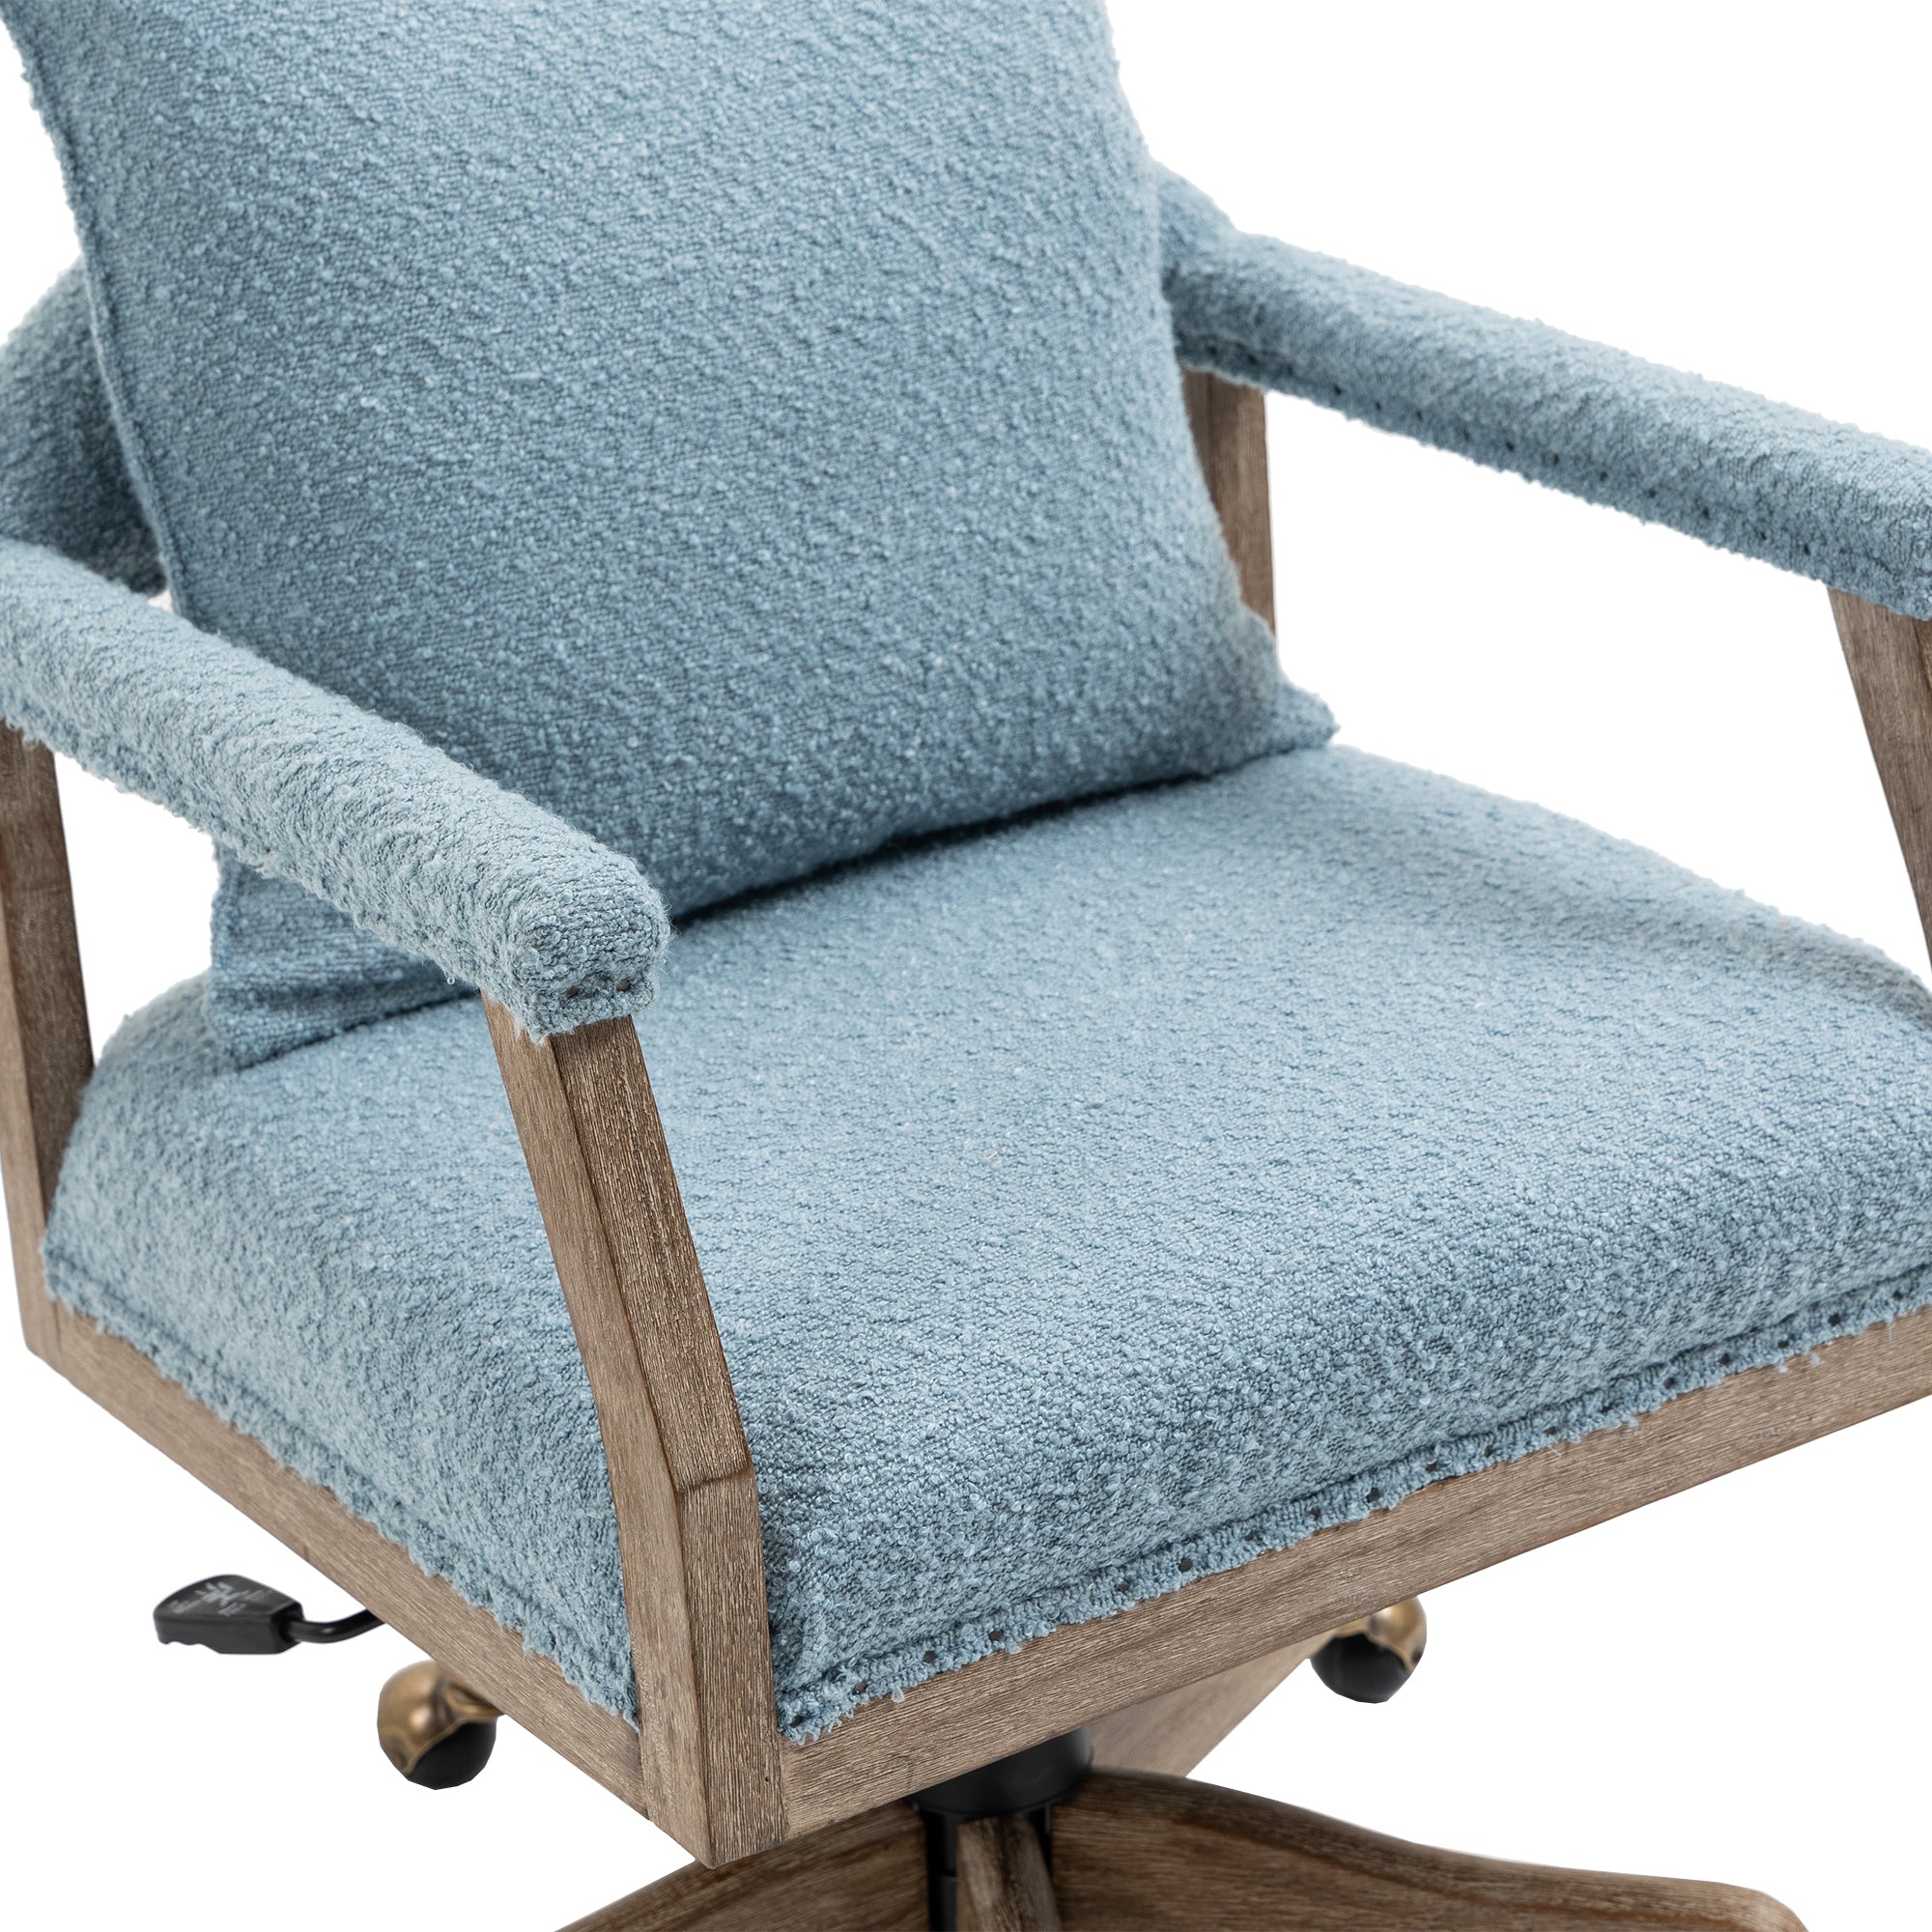 Office Chair Adjustable Swivel Chair Fabric Seat Home Study Chair - Light Blue